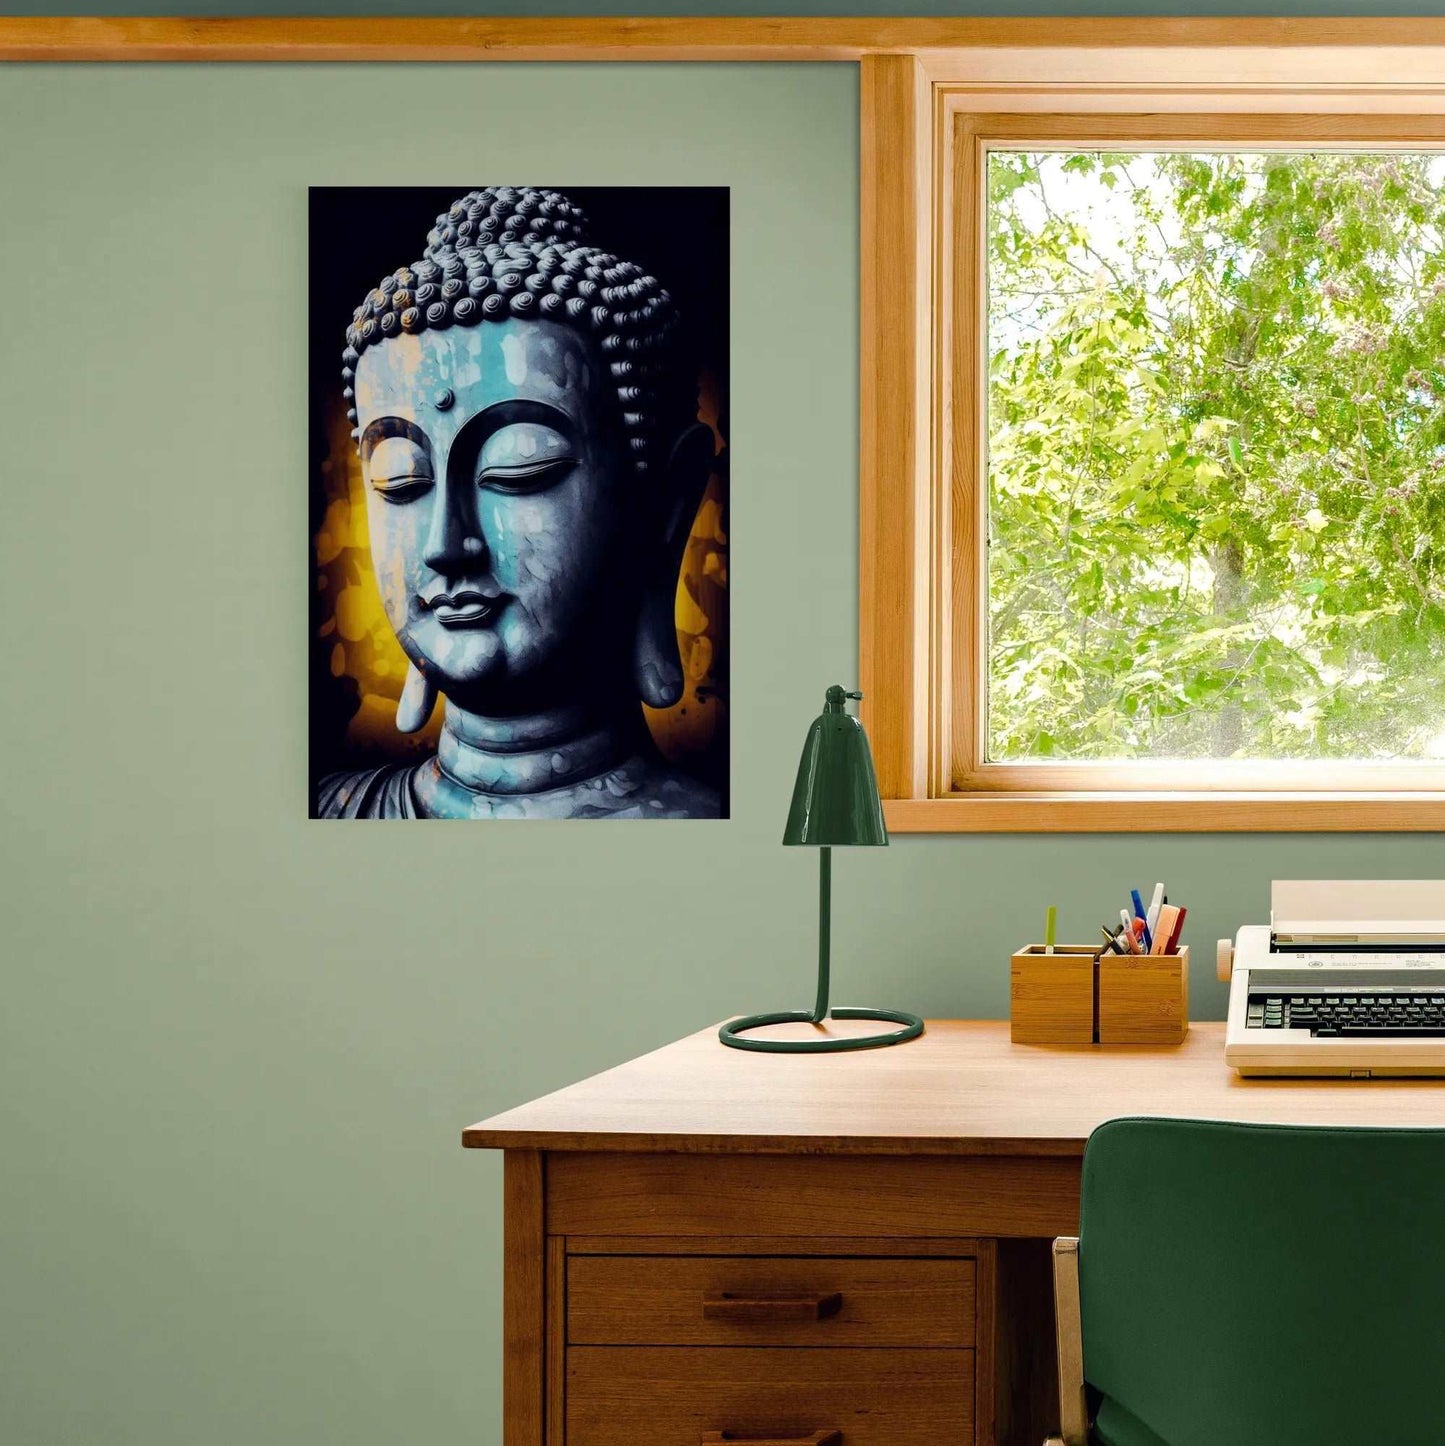 Serene office space featuring a grayscale Buddha portrait with a yellow bokeh effect, above a wooden desk with a typewriter and greenery outside the window.